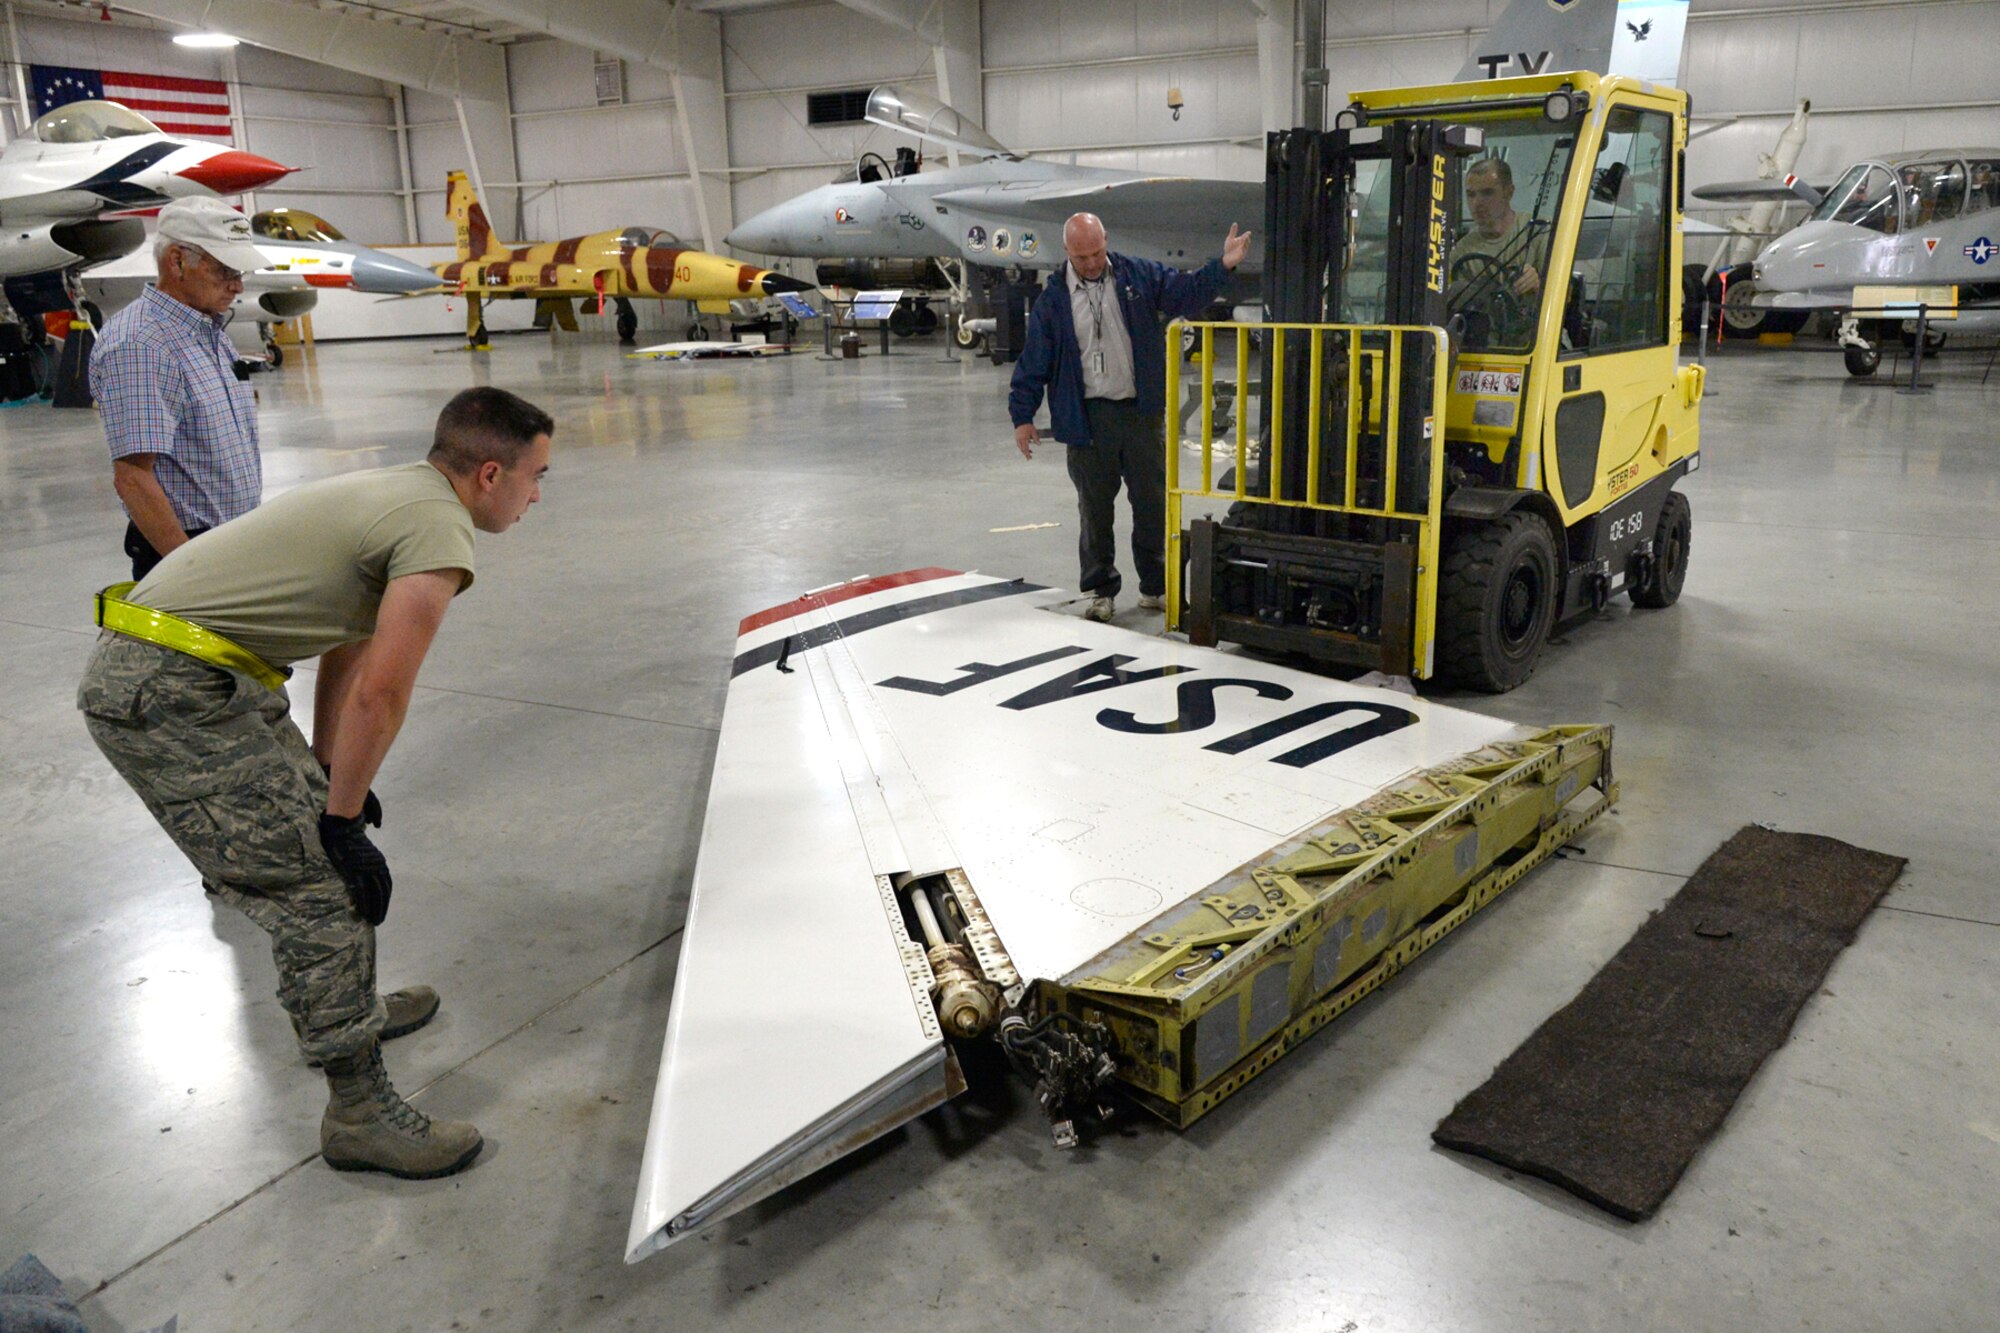 Hill Aerospace Museum staff and volunteers reposition an F-16 wing to be installed on a static display aircraft May 29, 2018, at Hill Air Force Base, Utah. Now located at the east end of the museum’s fighter gallery, the former Thunderbird F-16A aircraft will be on display for visitors. (U.S. Air Force photo by Todd Cromar)